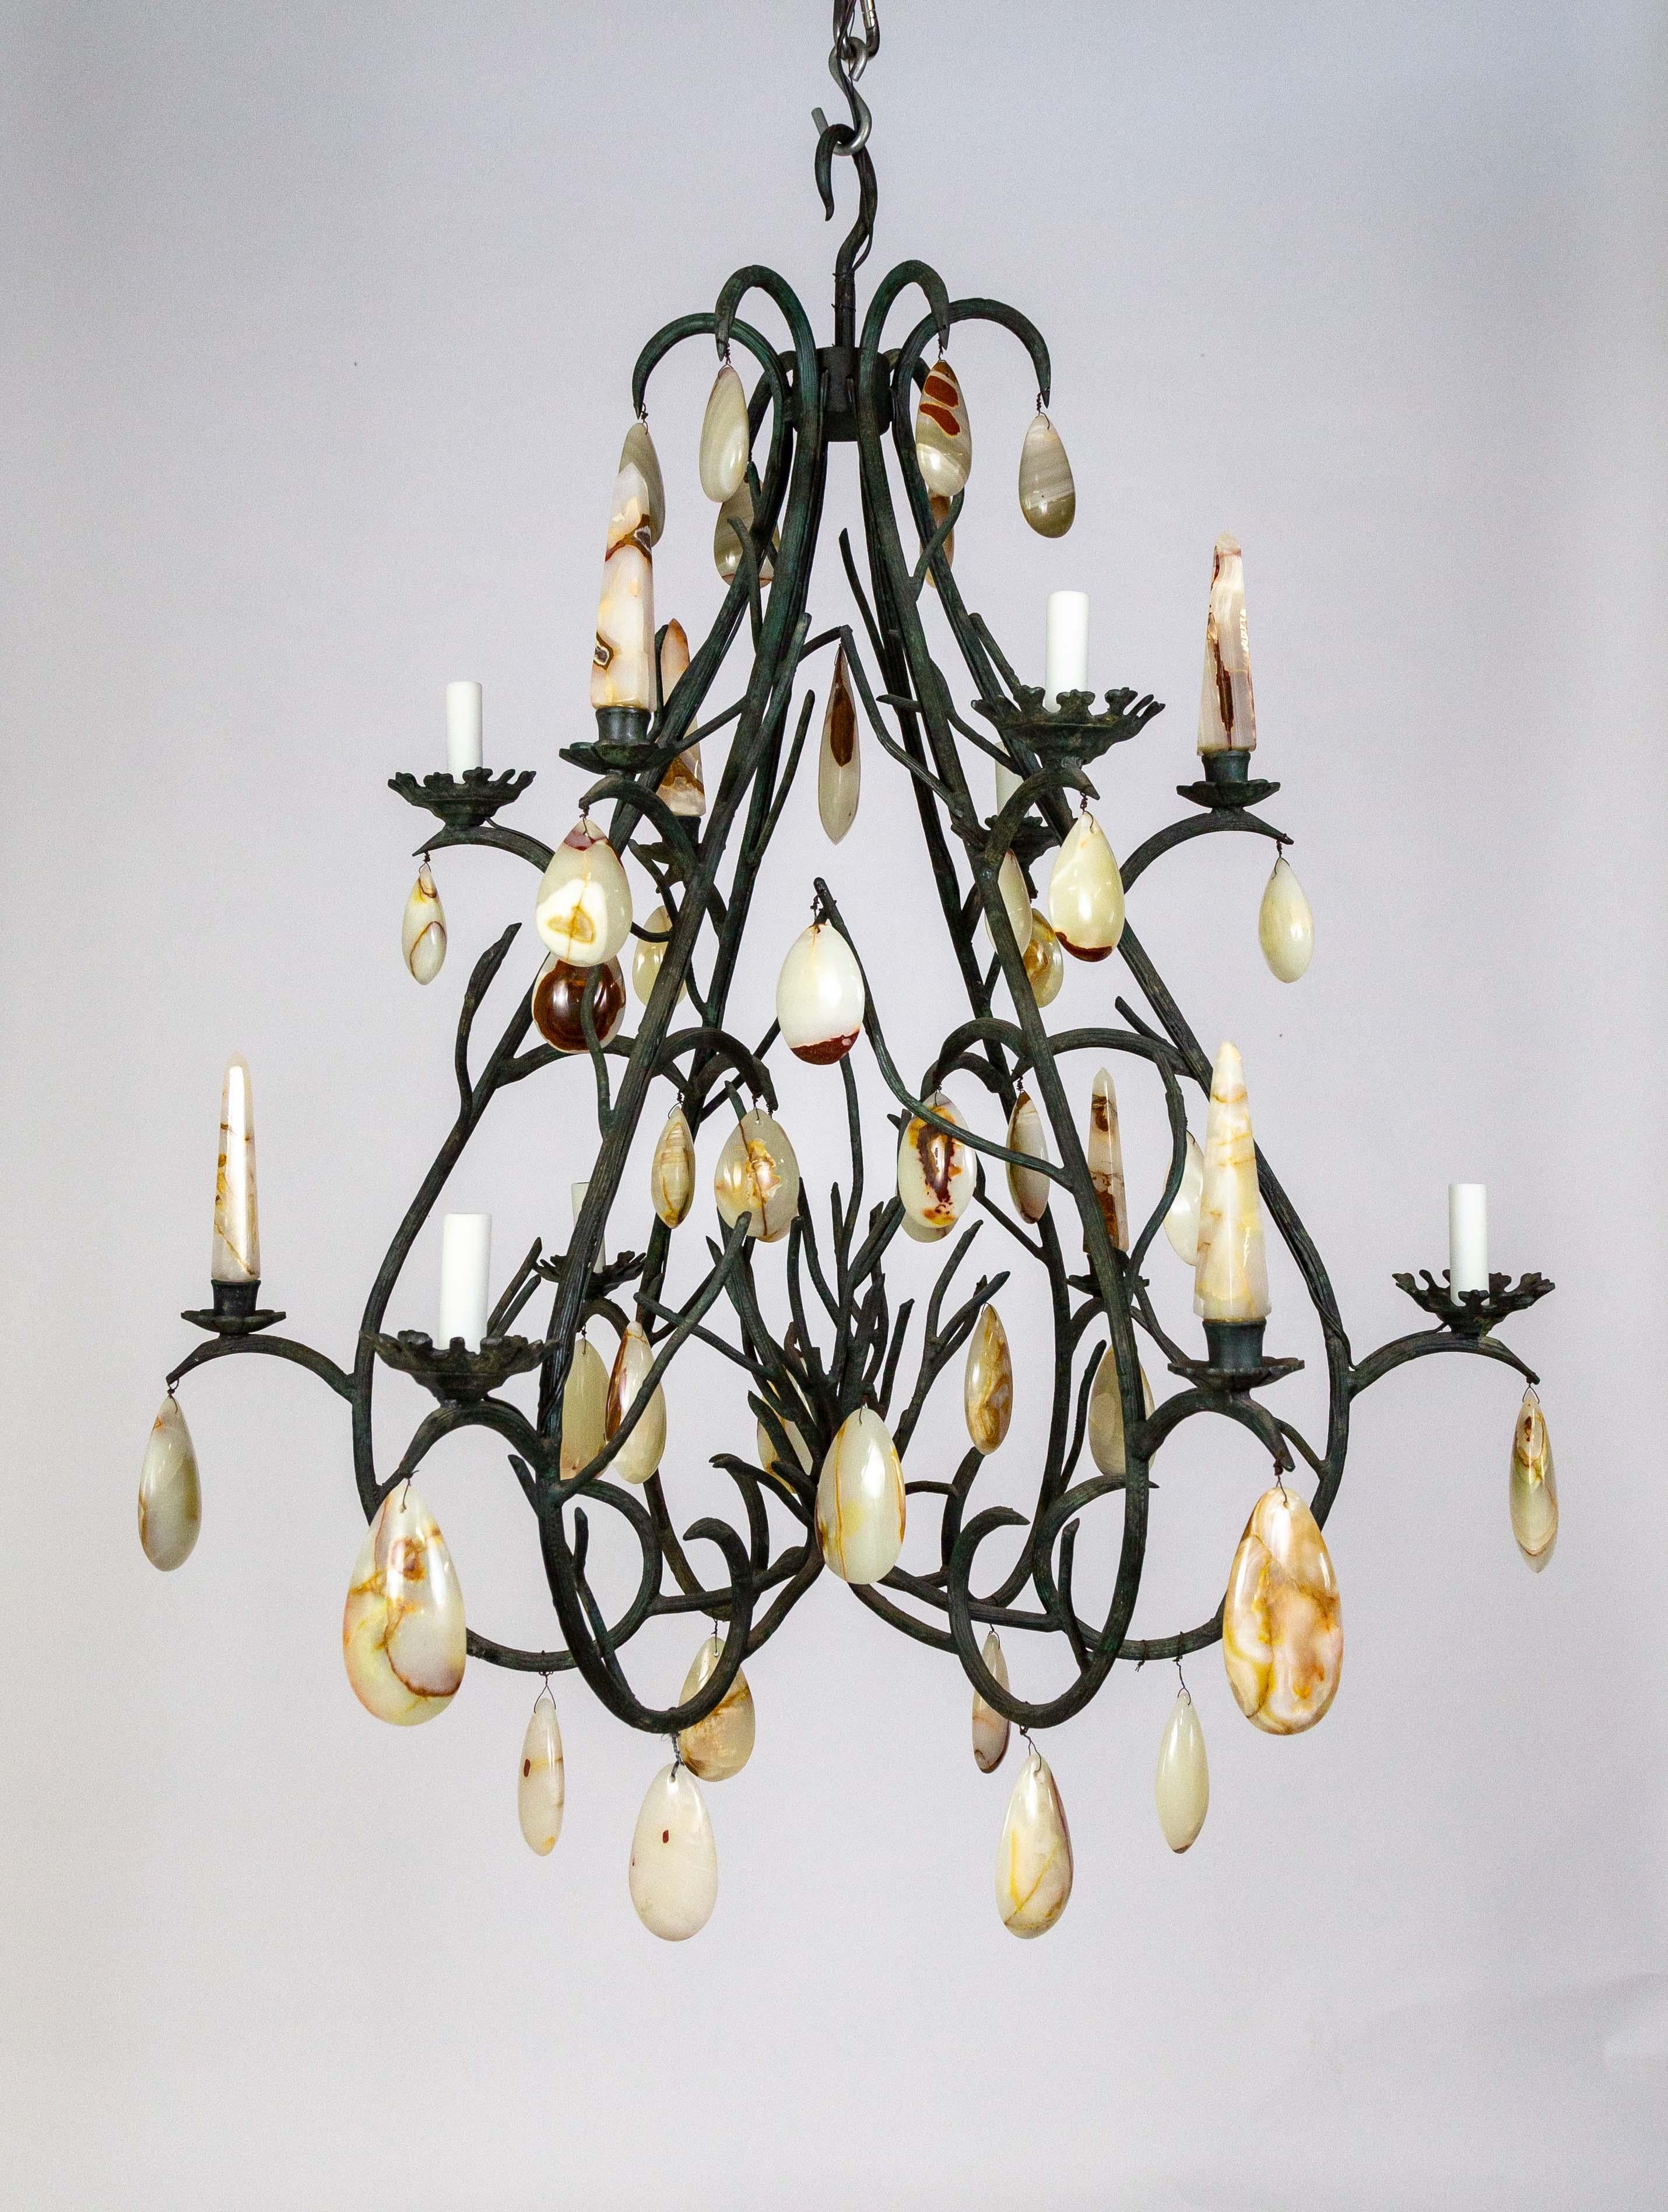 A sizable chandelier of curling branches in the form of an upside-down heart with two tiers of stone spears and 6 lights.  Designed by Luciano Tempo and made of reeded cast iron with forest-green finish and detailed bobeches The structure is decked